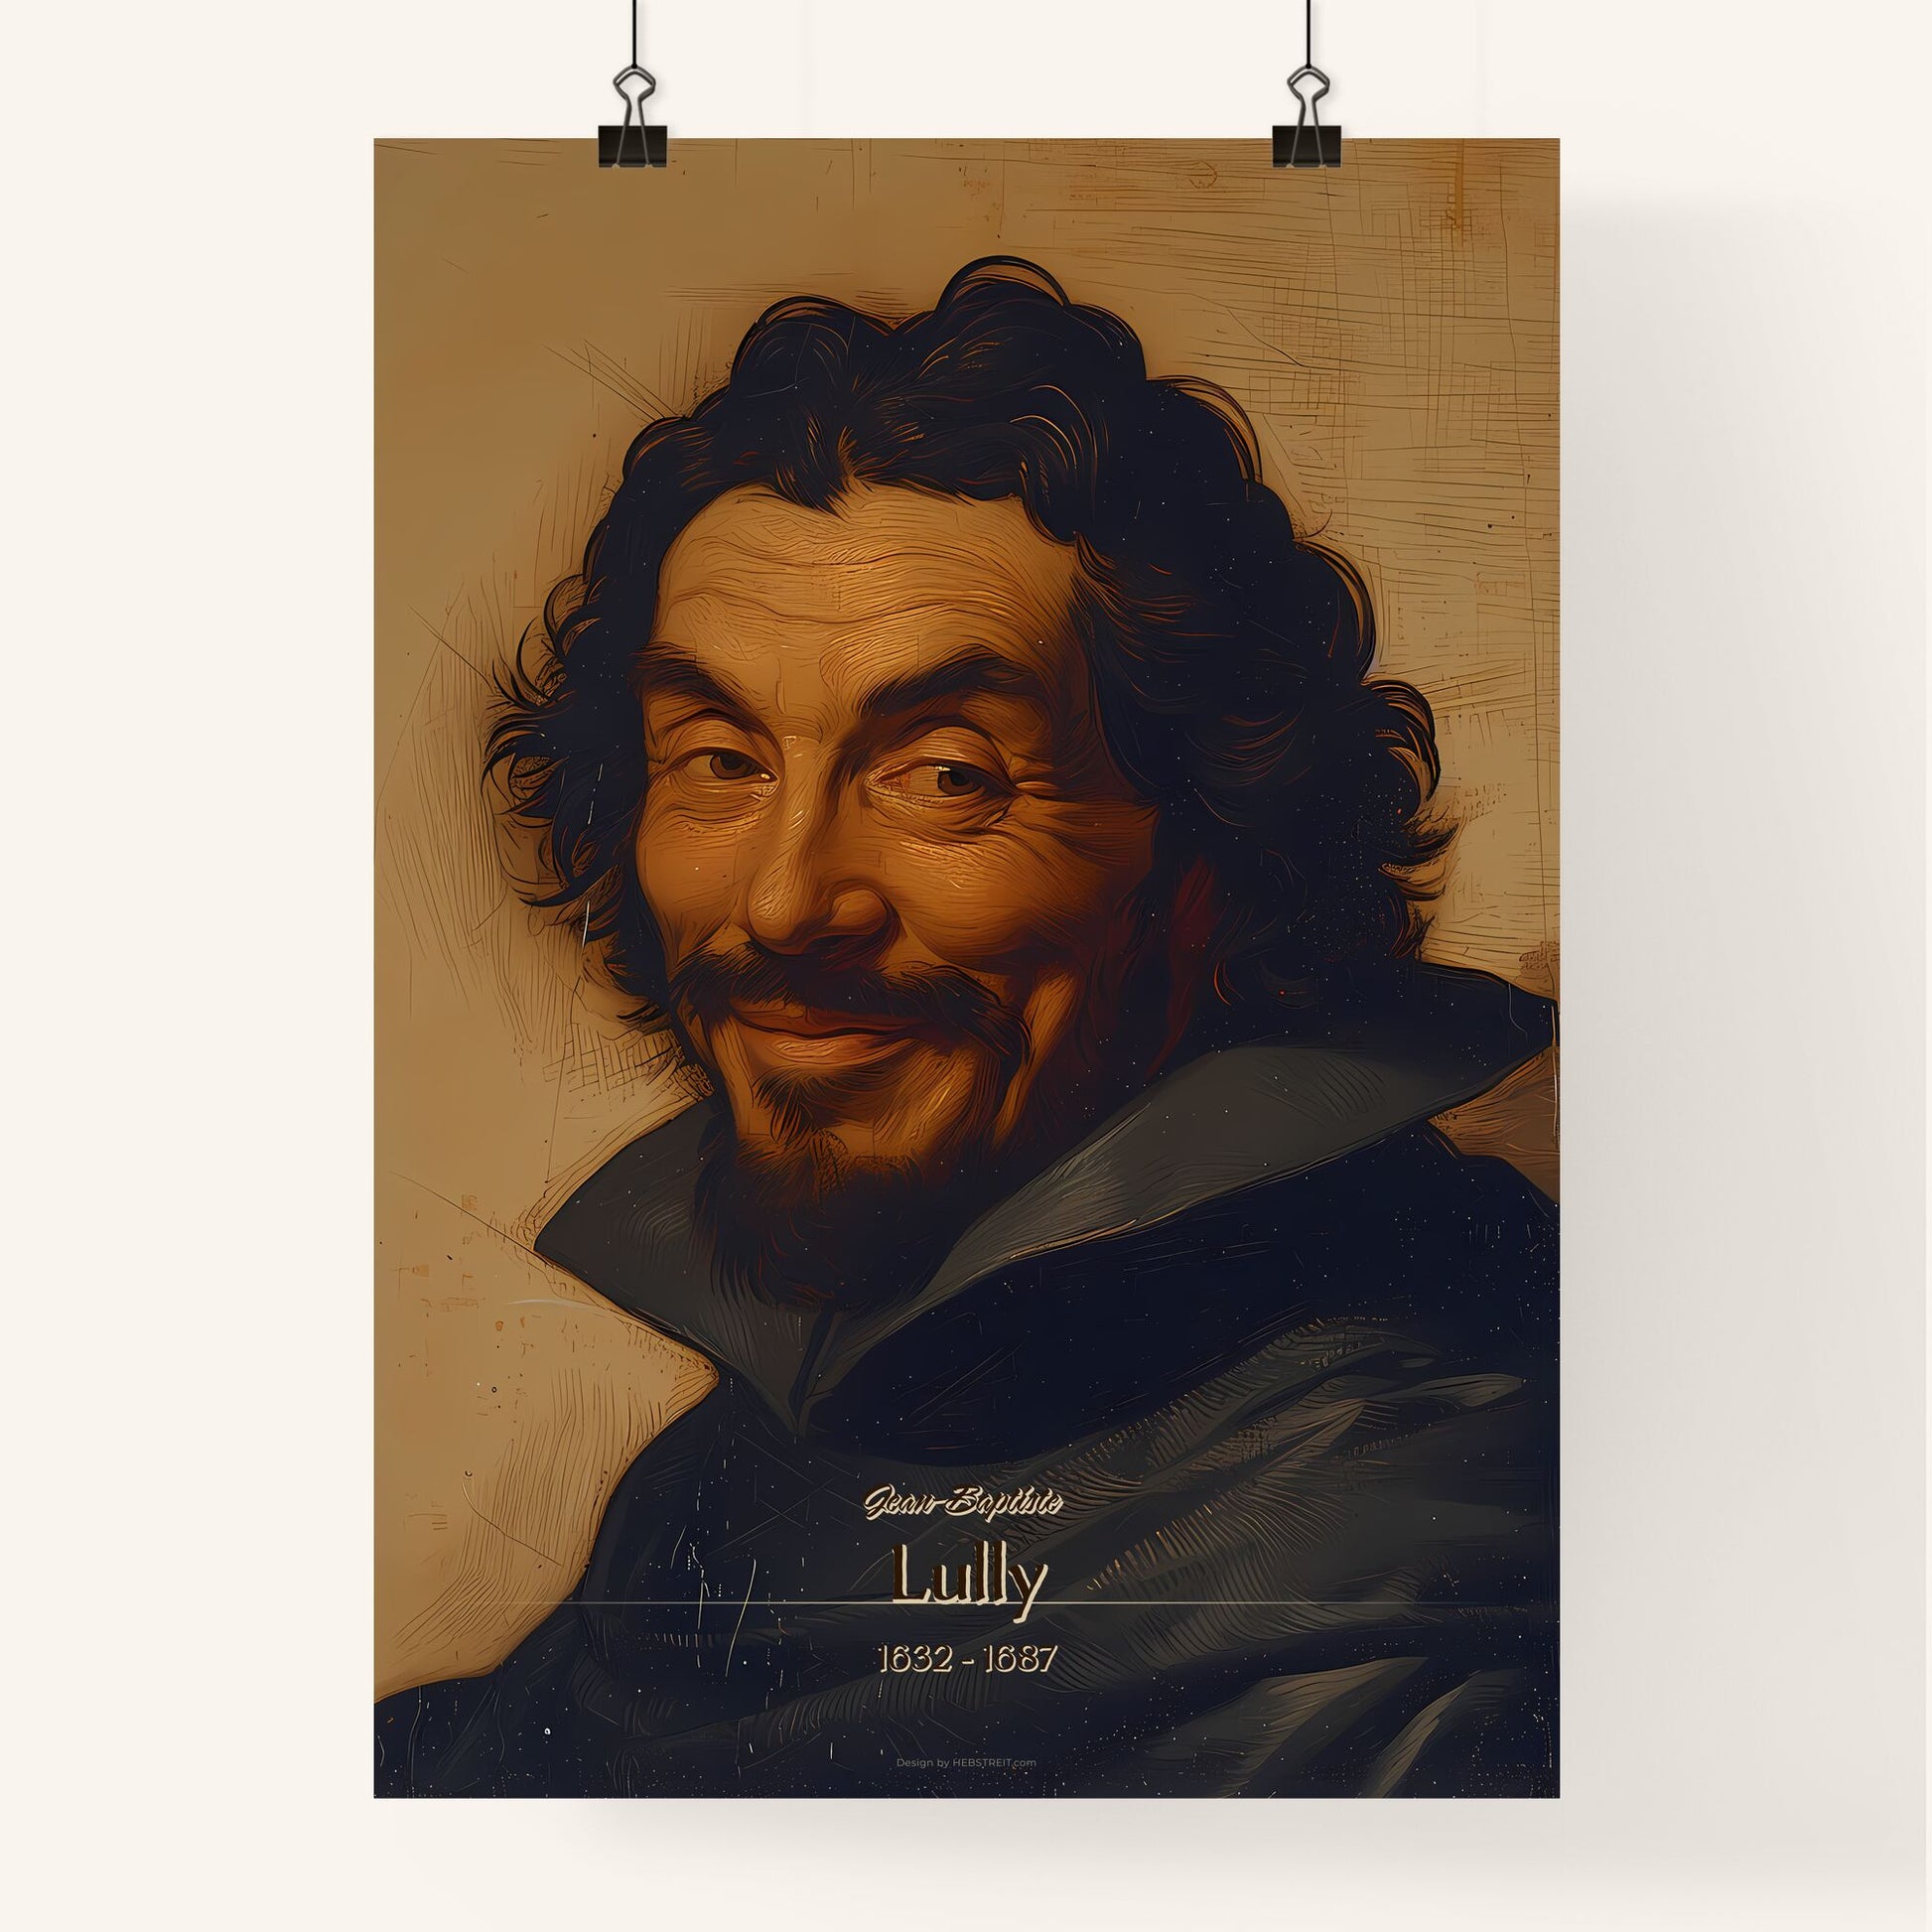 Jean-Baptiste, Lully, 1632 - 1687, A Poster of a man with a beard and mustache Default Title